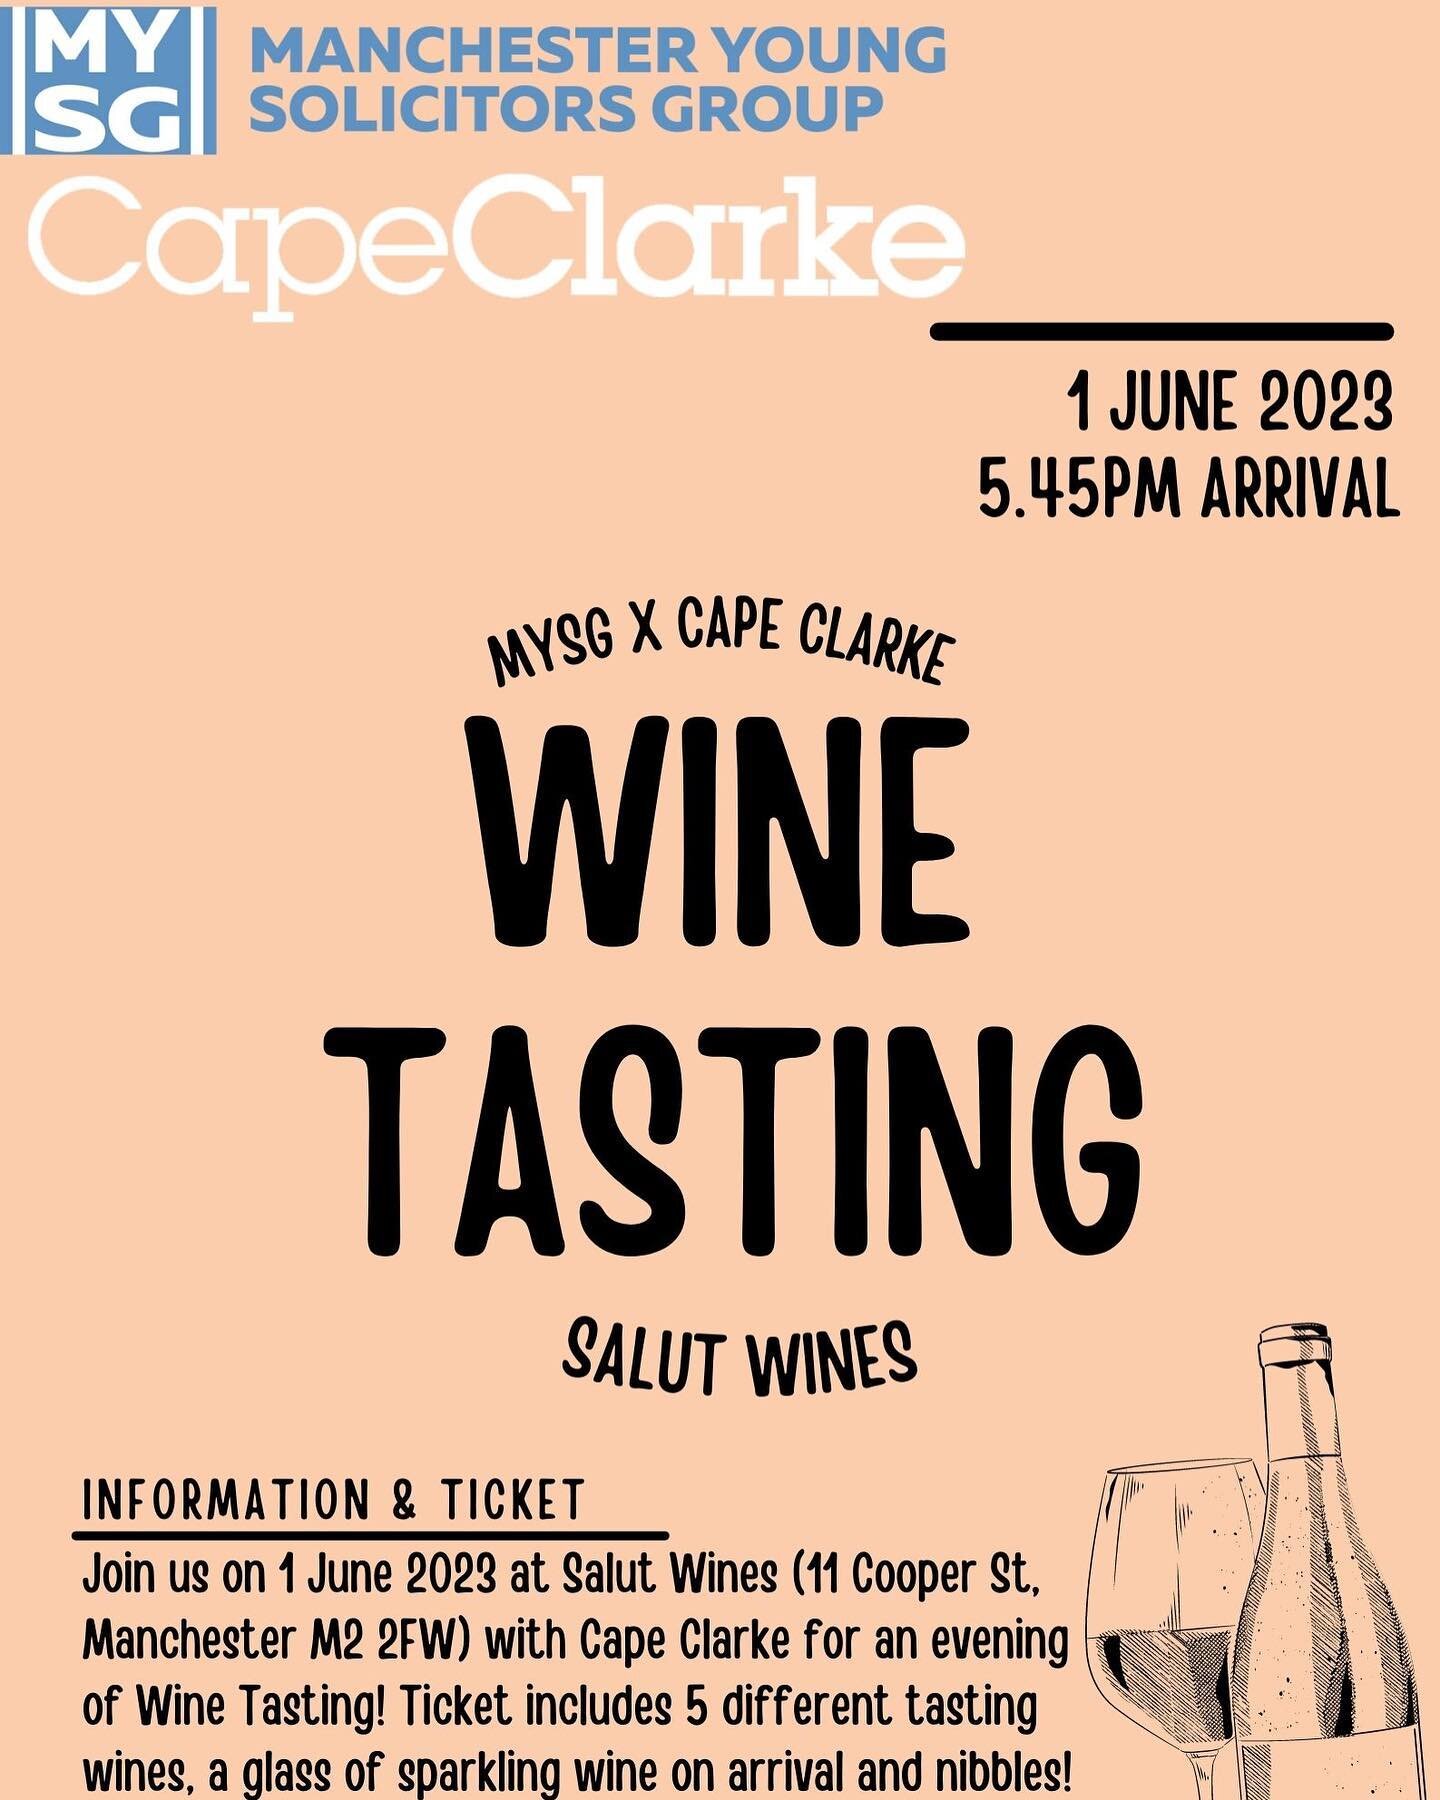 Make sure to join us for our next event - Wine Tasting at Salut Wines kindly sponsored by @capeclarke_legal 🍷 😍 

The evening will consist of 6 different wines, including a glass of sparkling wine on arrival. There will be light snacks and an oppor